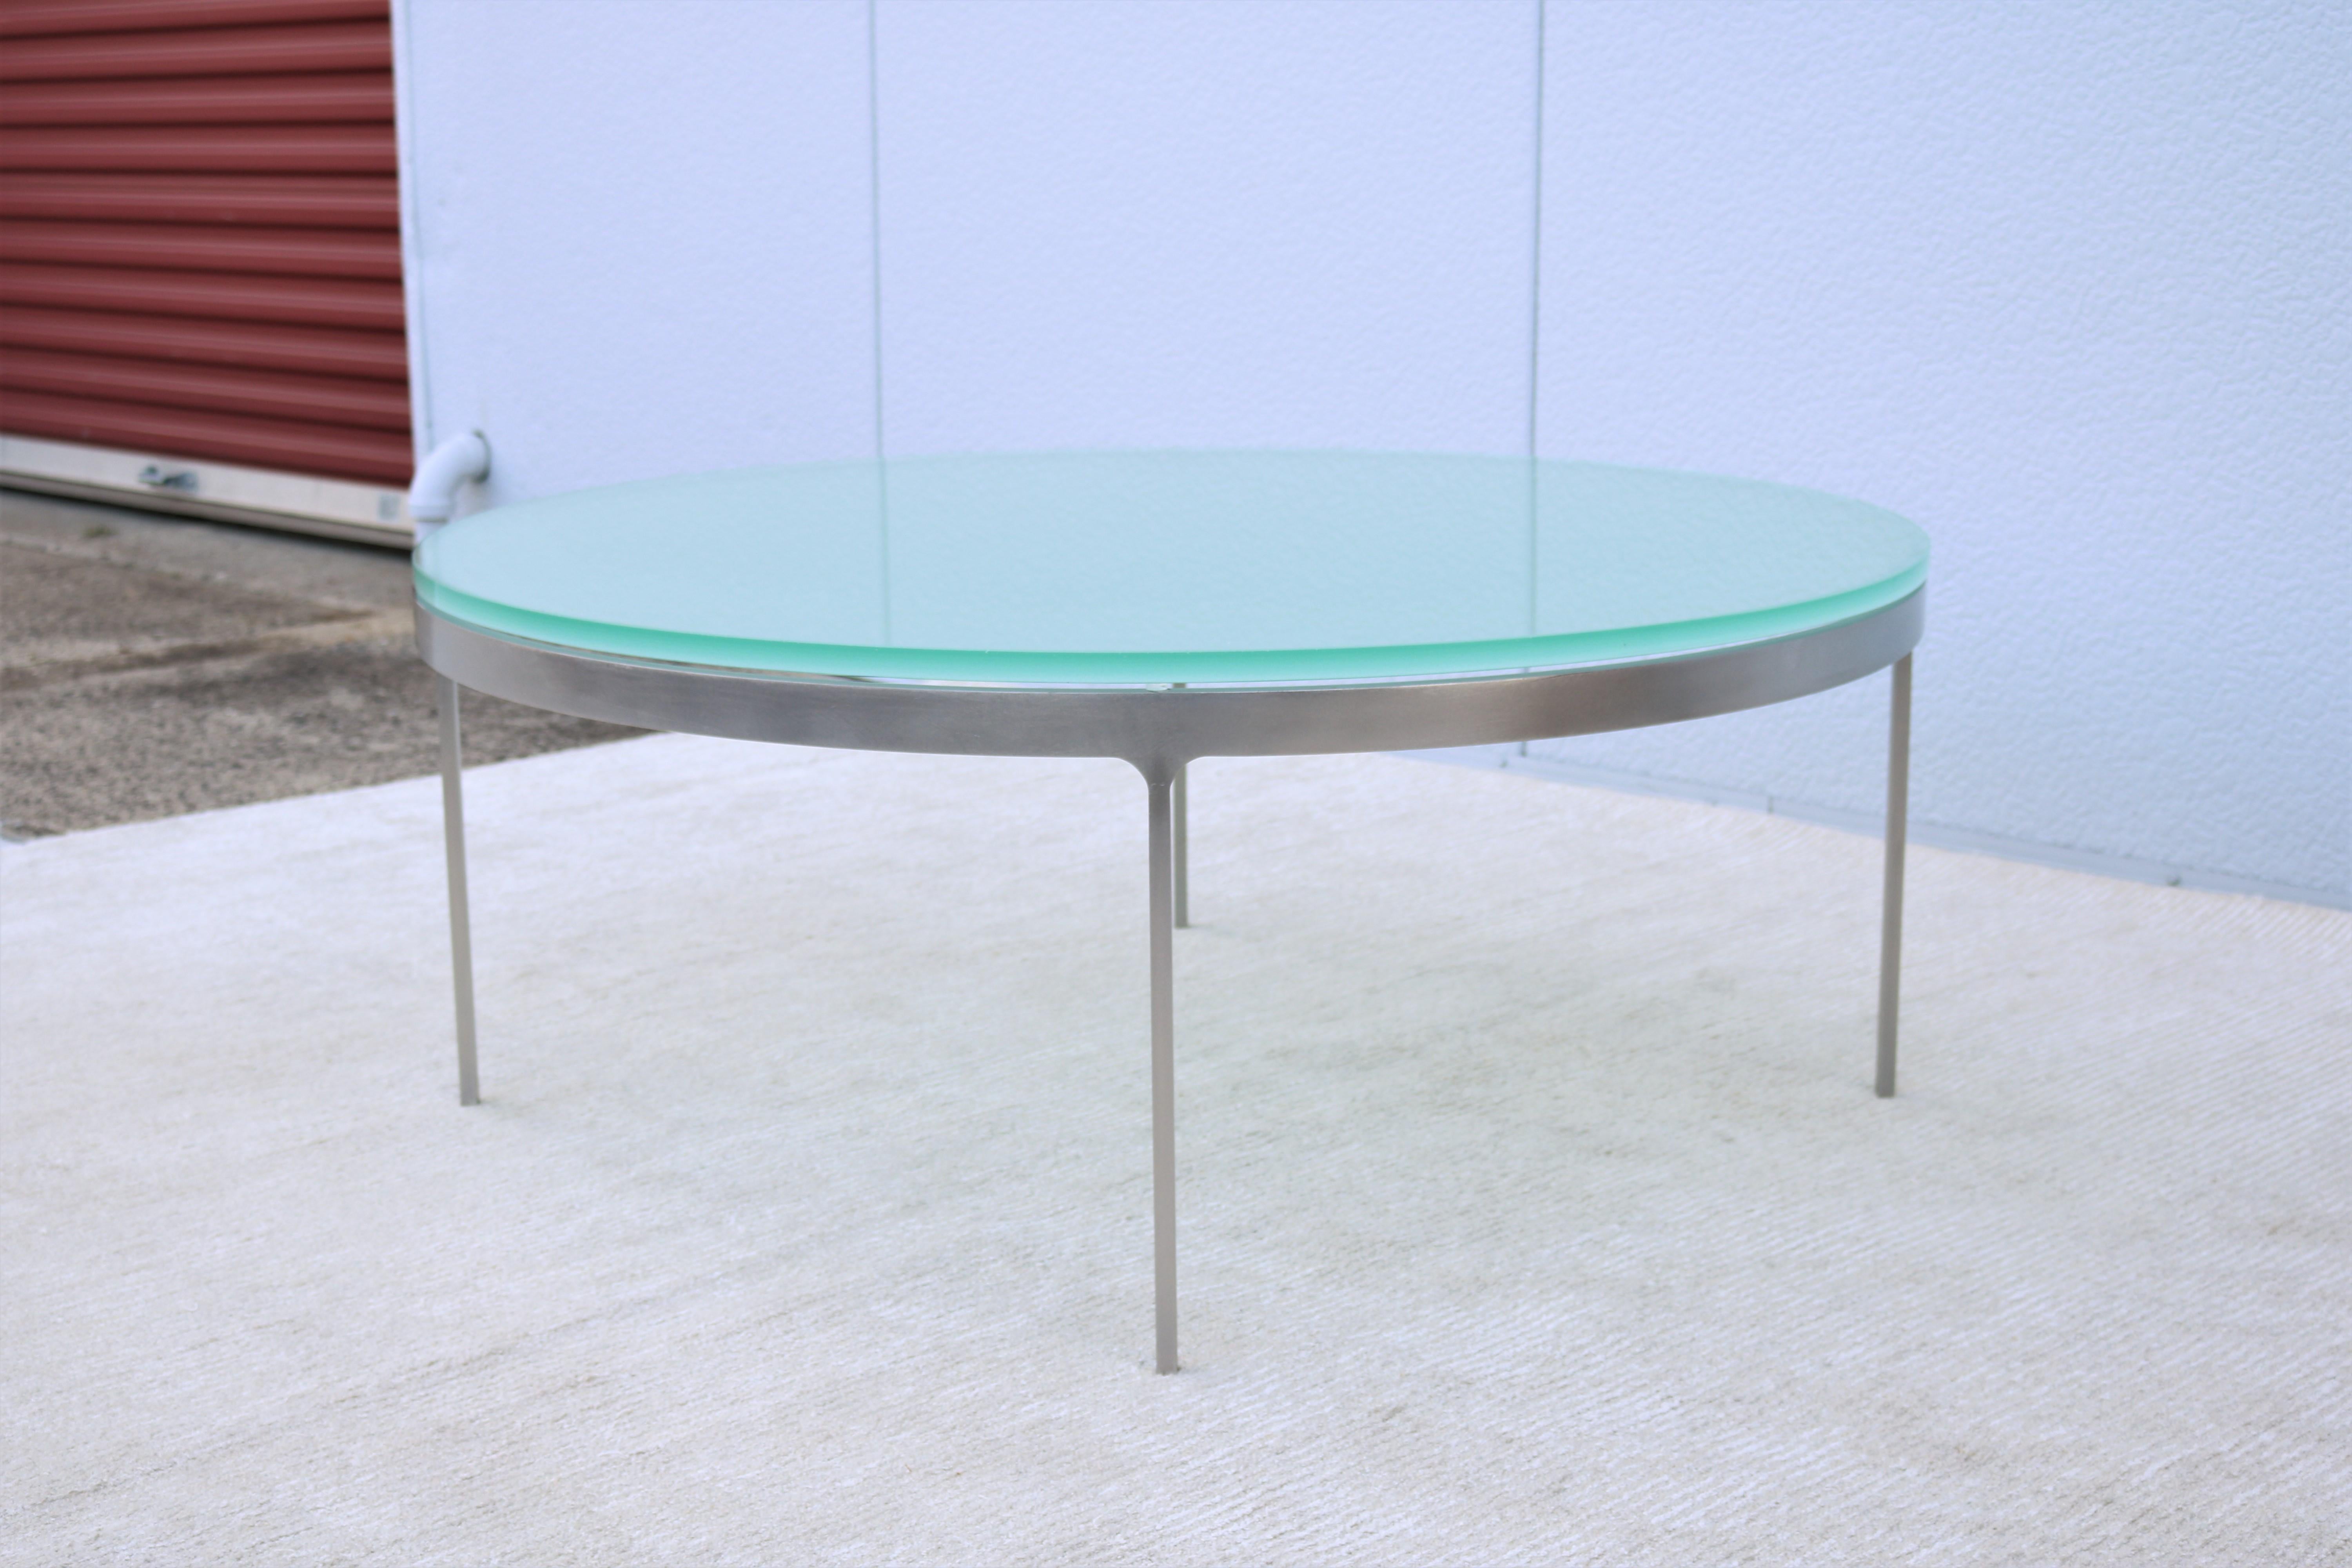 Vintage Minimalist Nicos Zographos Round Glass and Stainless-Steel Coffee Table For Sale 1